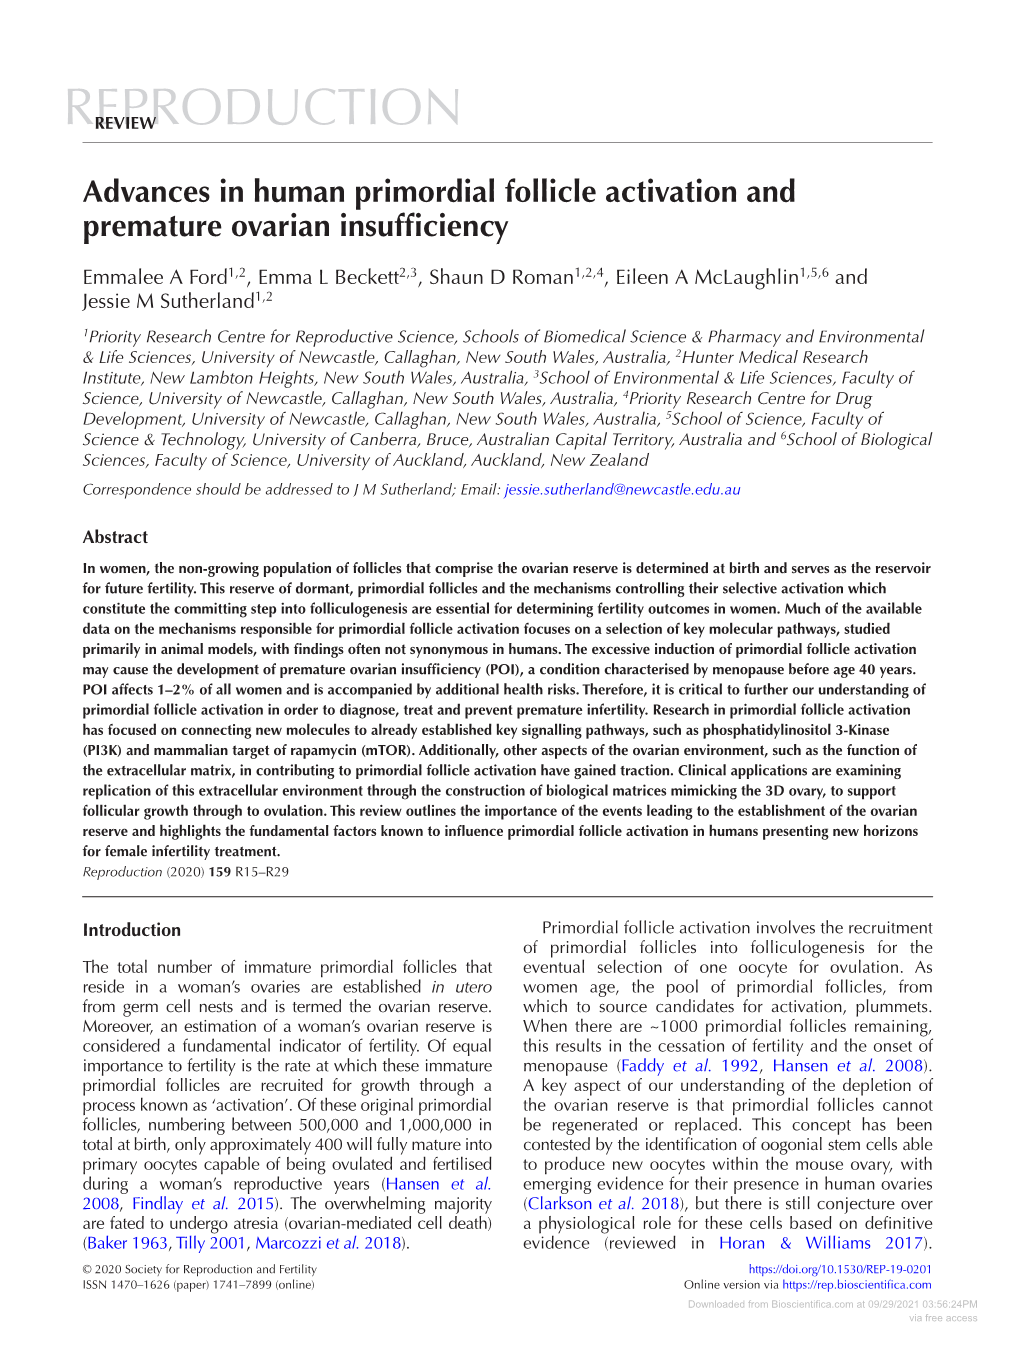 Advances in Human Primordial Follicle Activation and Premature Ovarian Insufficiency